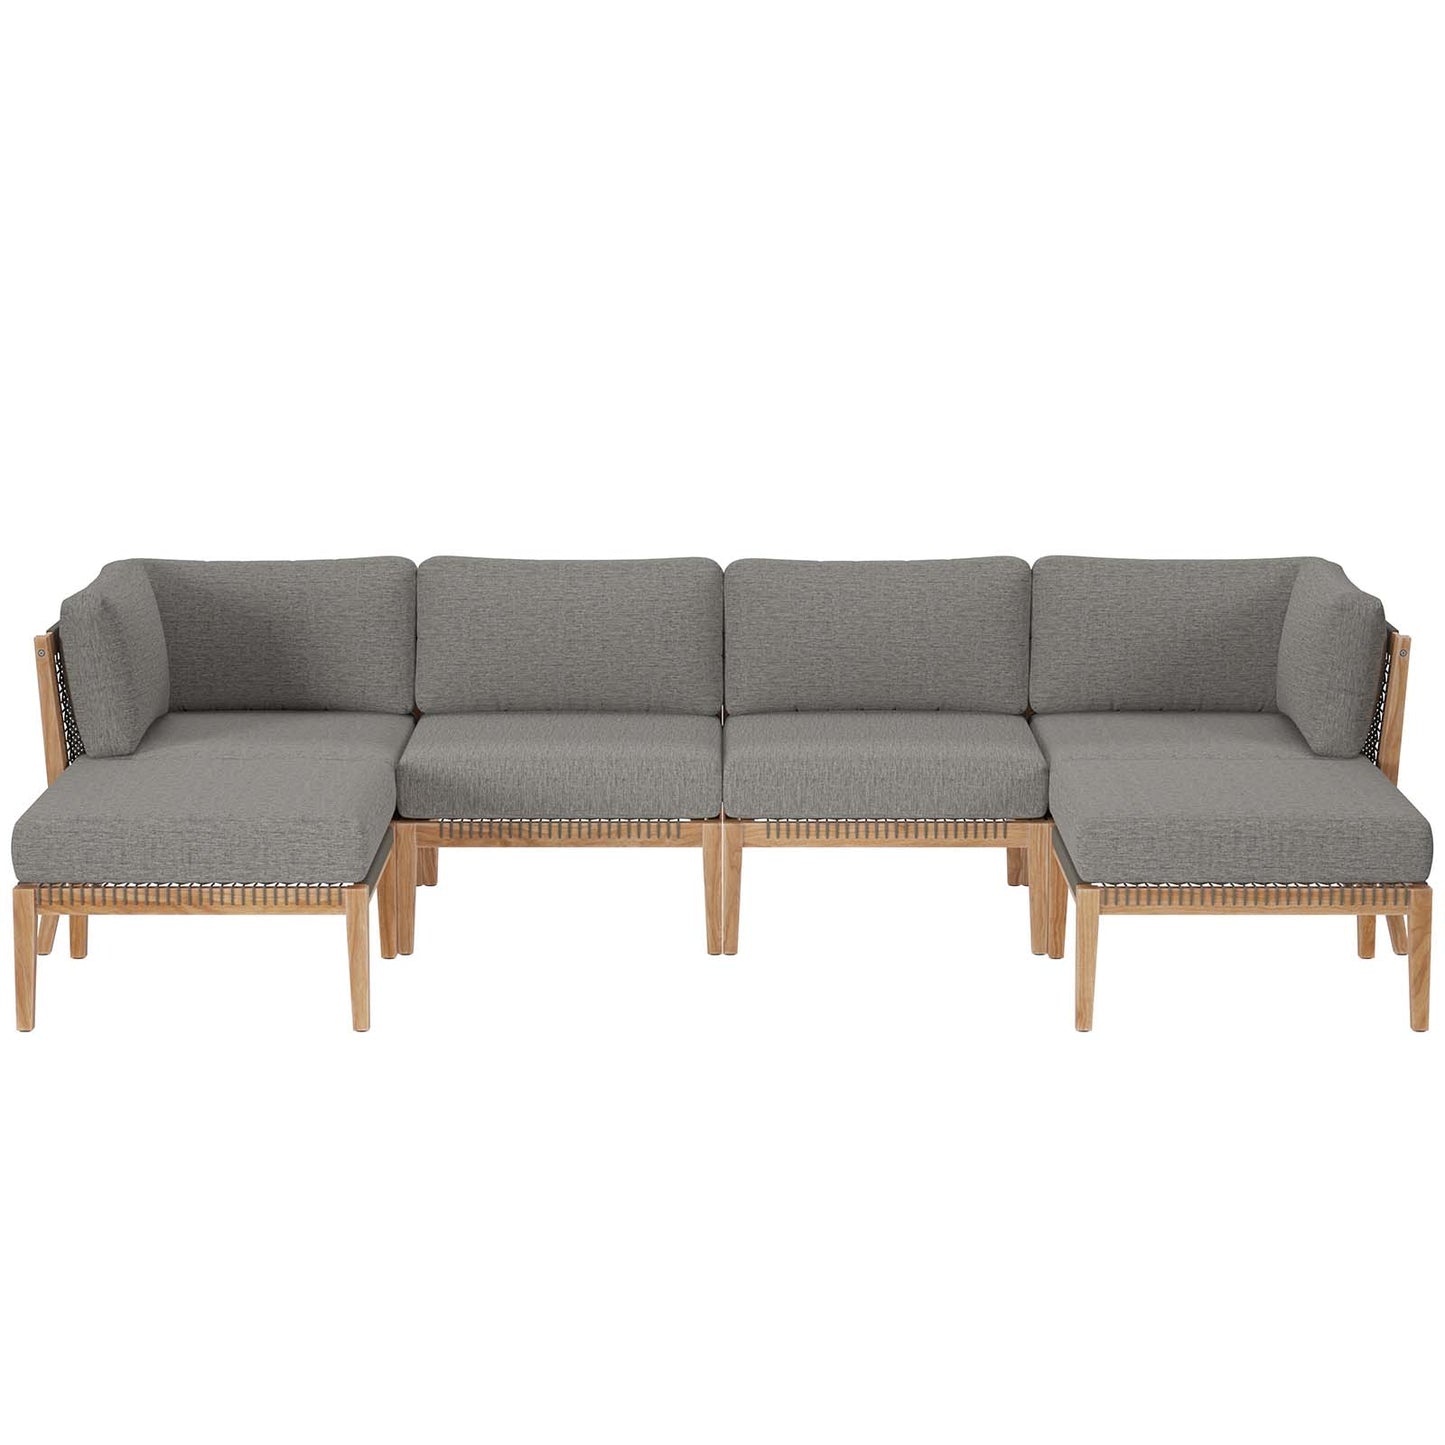 Clearwater Outdoor Patio Teak Wood 6-Piece Sectional Sofa Gray Graphite EEI-6122-GRY-GPH